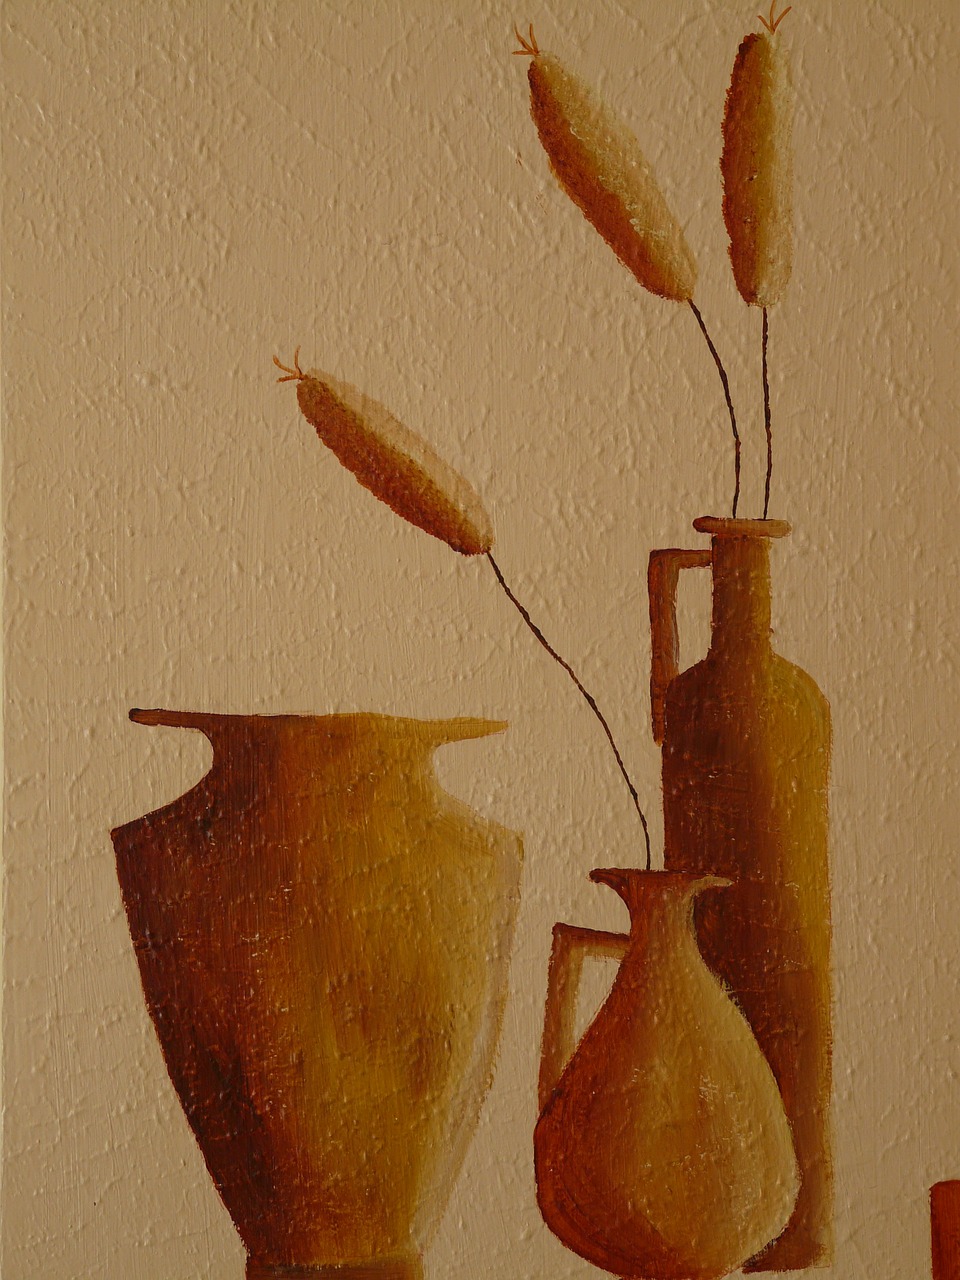 painting still life mural free photo